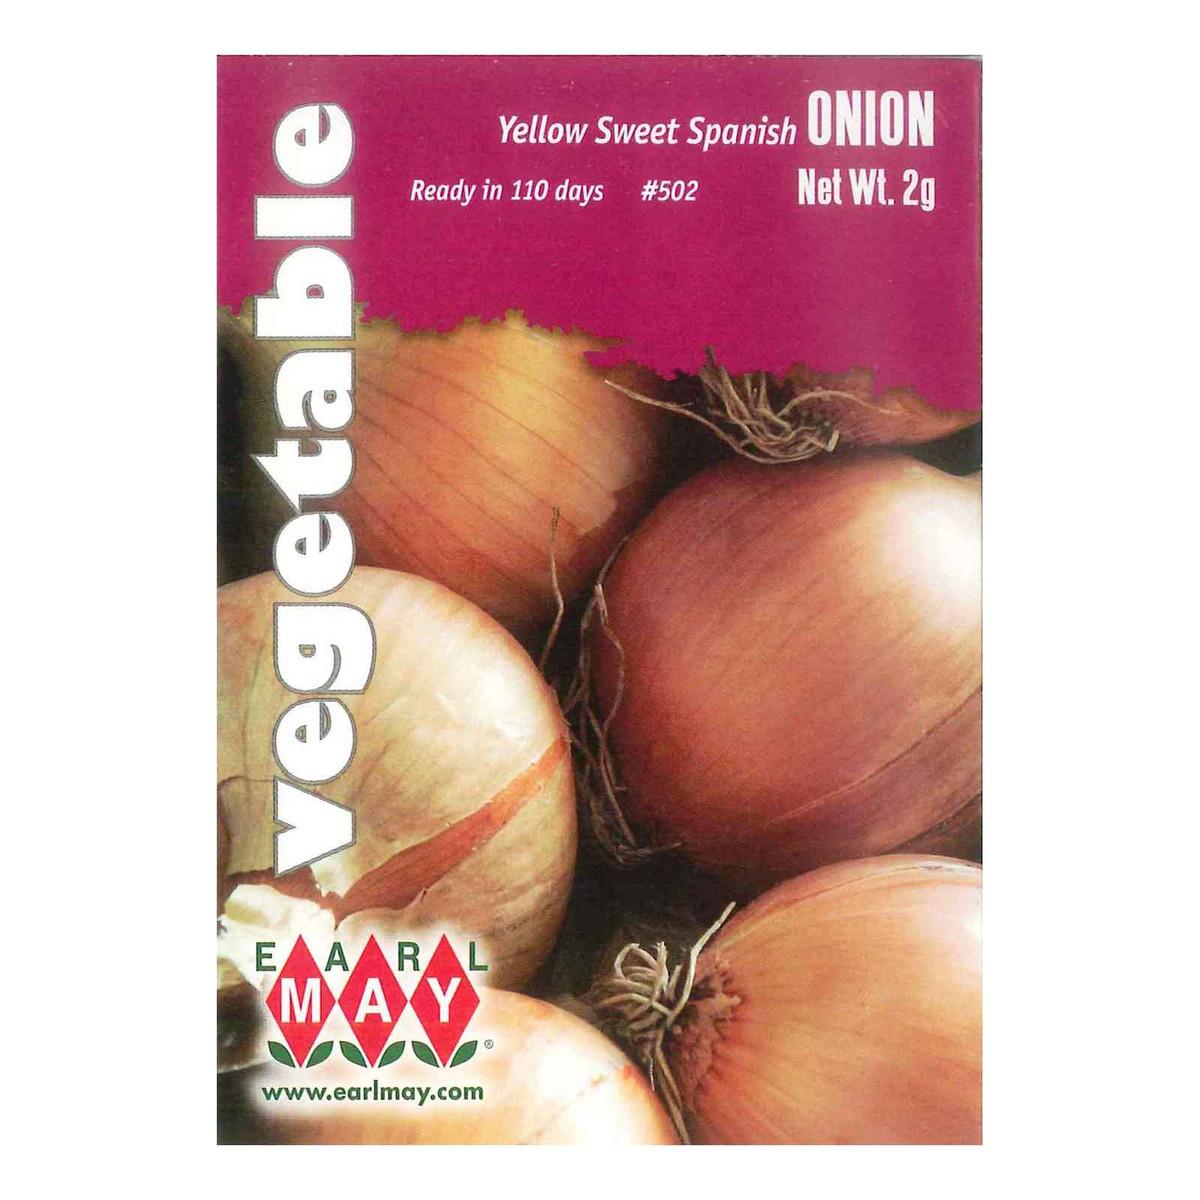 Packet of Earl May onion seeds.